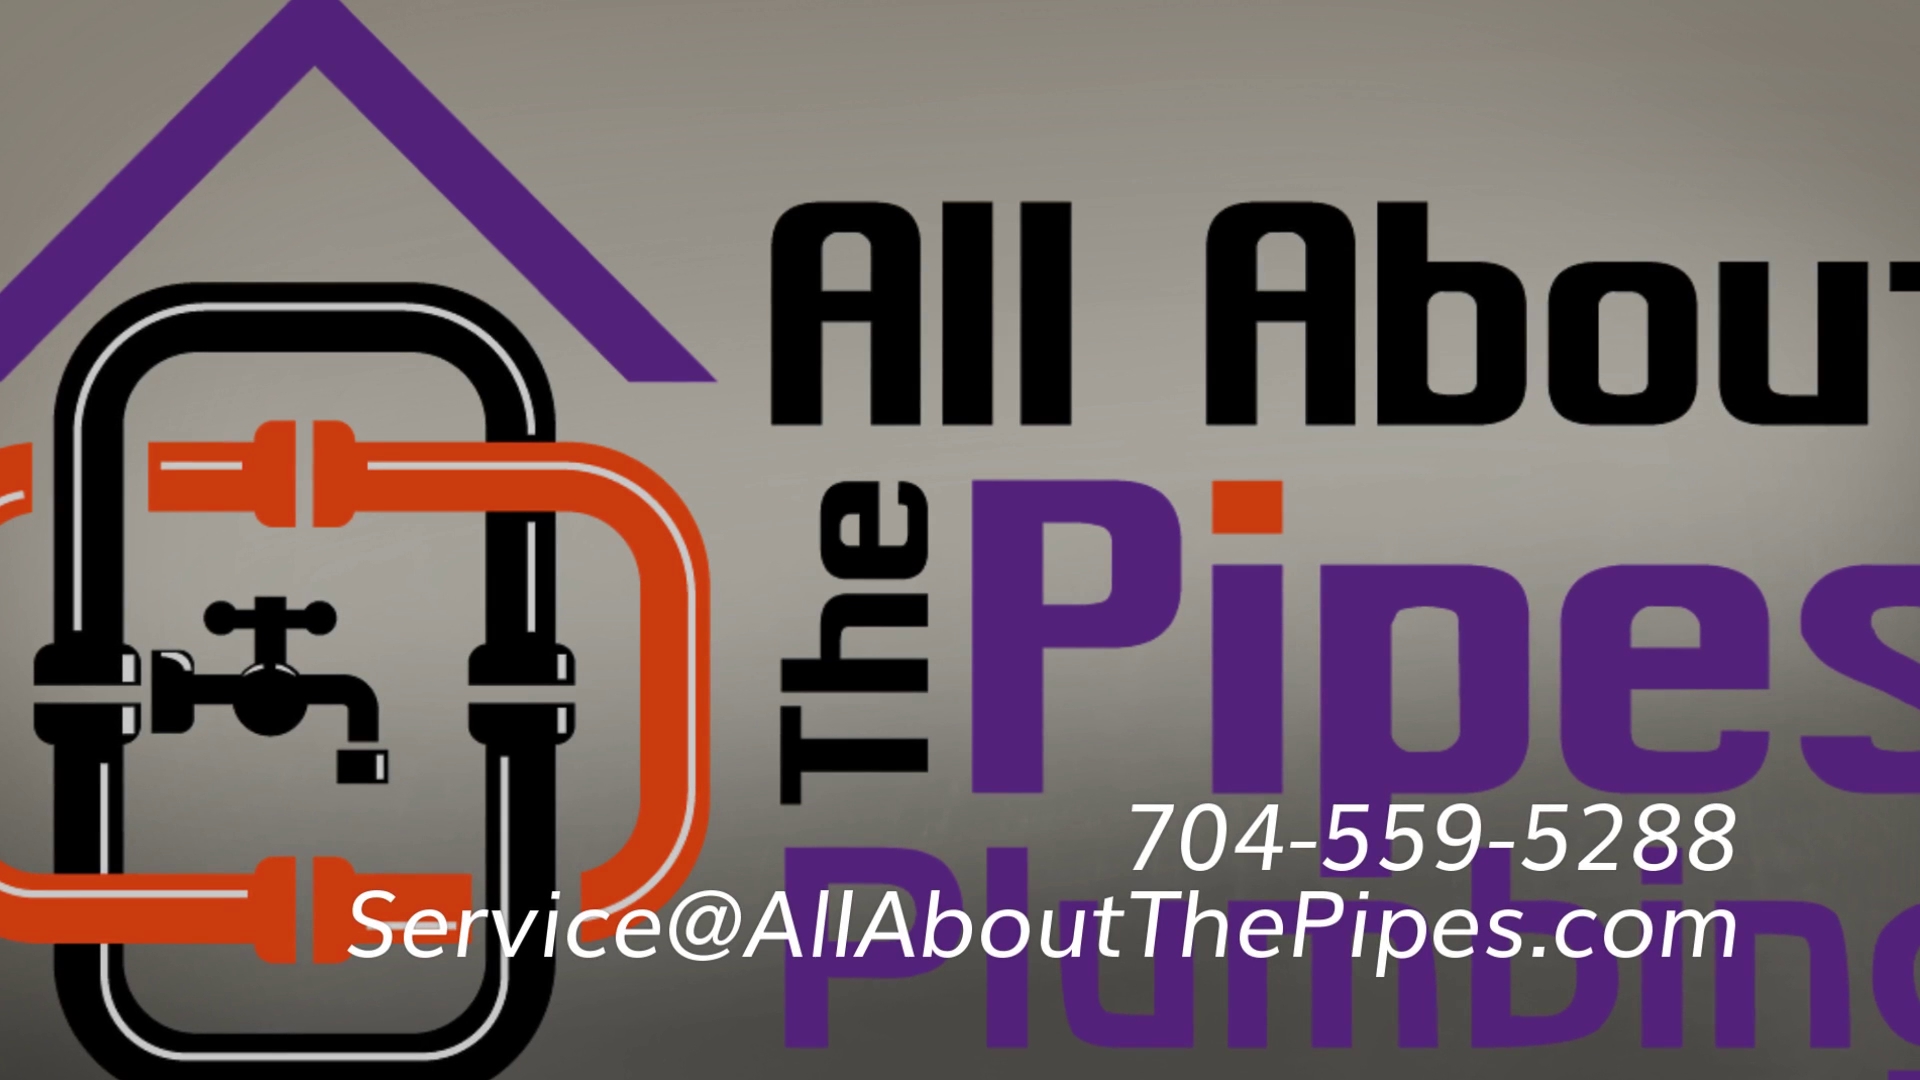 All About the Pipes Plumbing